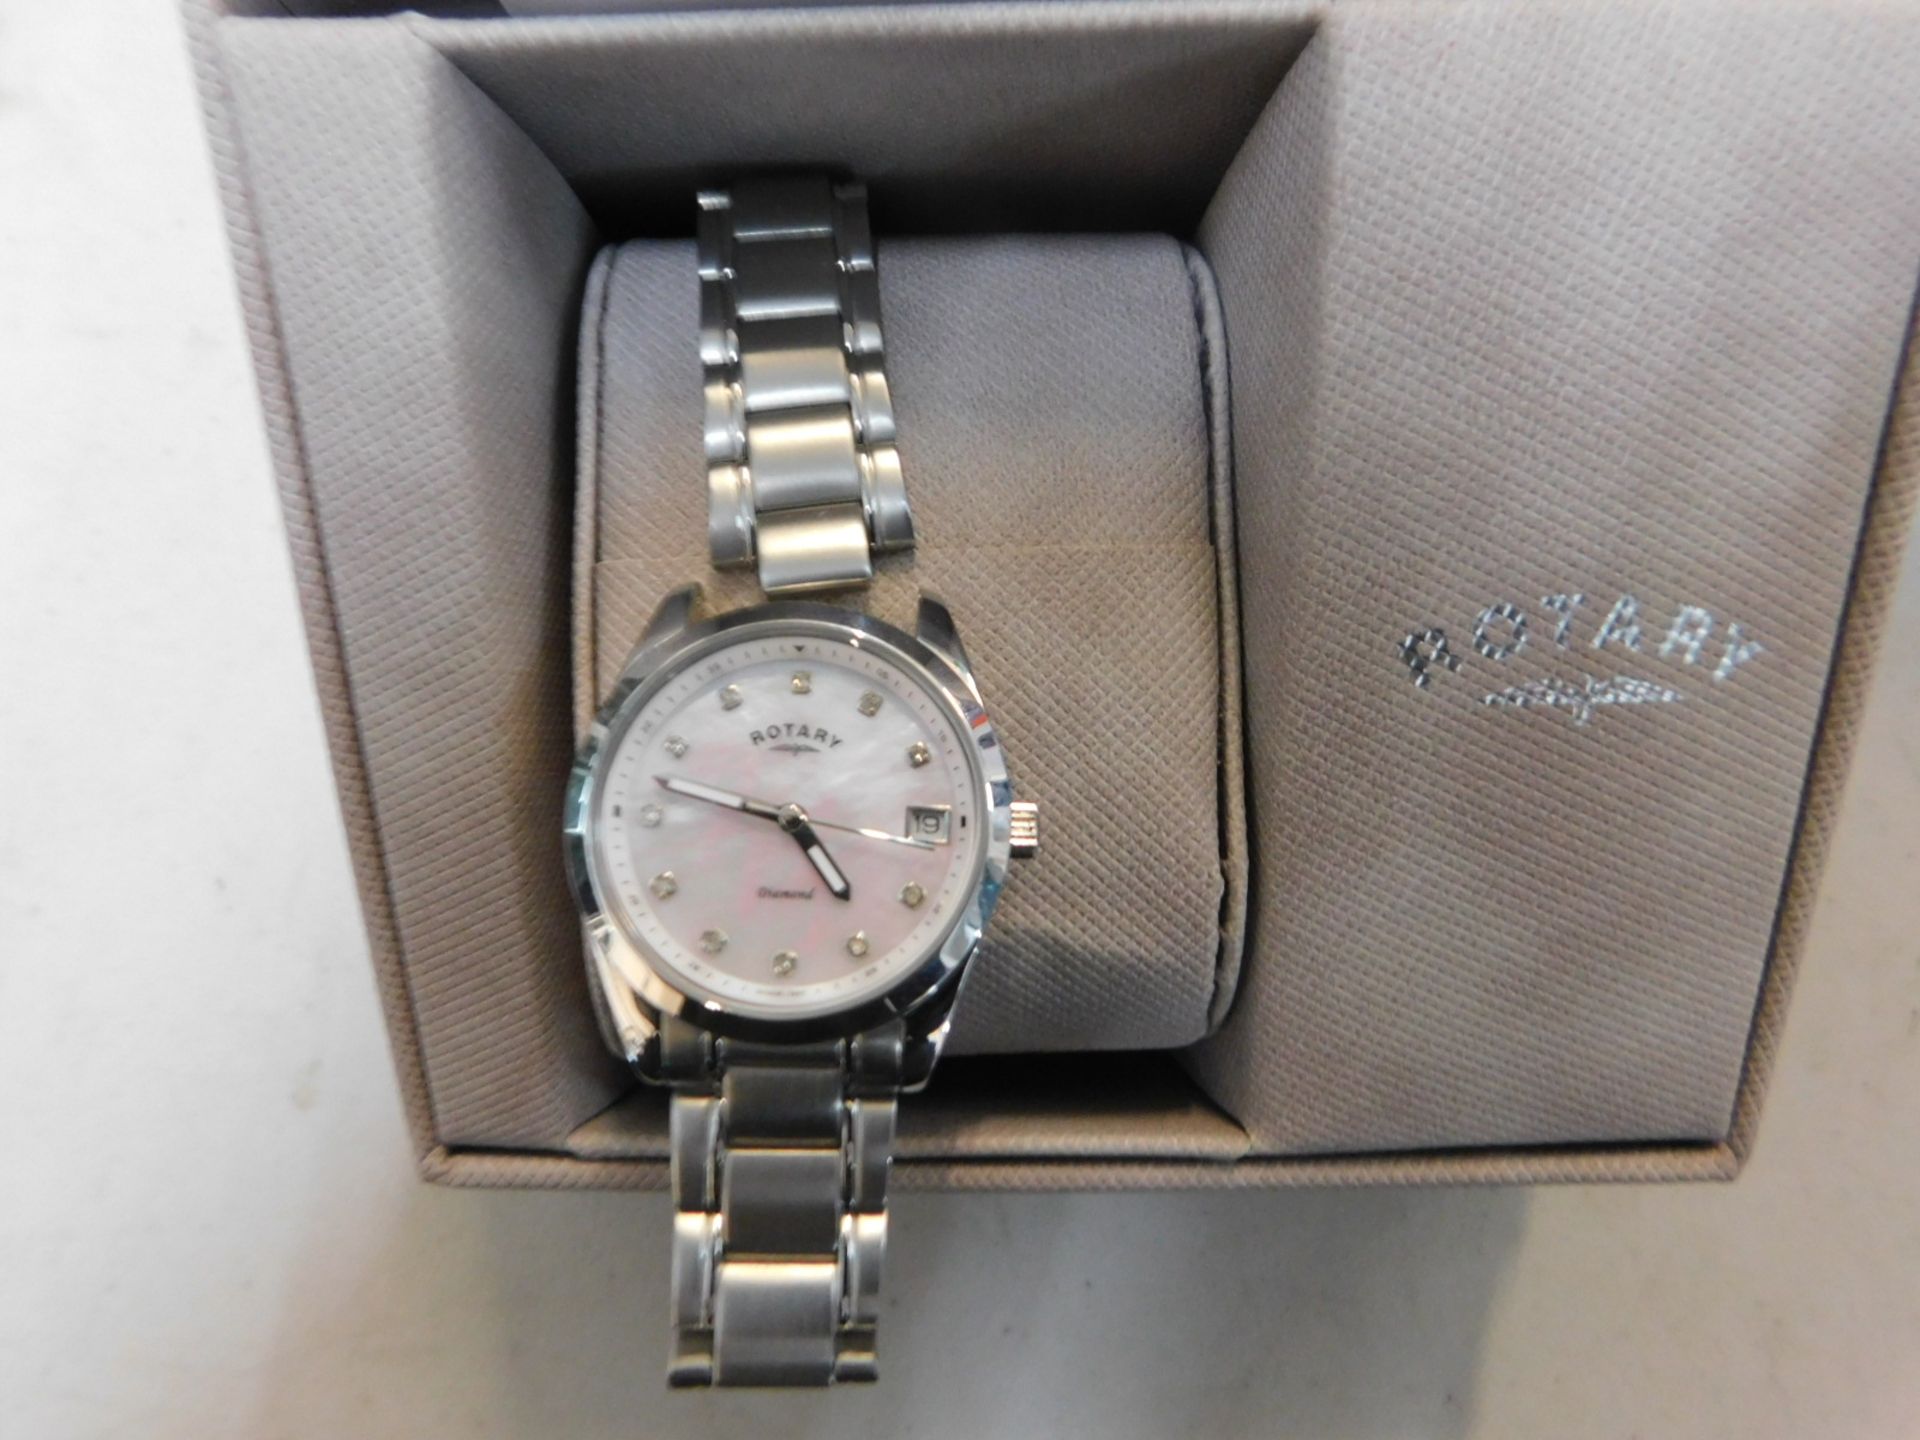 1 BOXED ROTARY LADIES SILVER WATCH MODEL LB00056/41 RRP Â£229.99